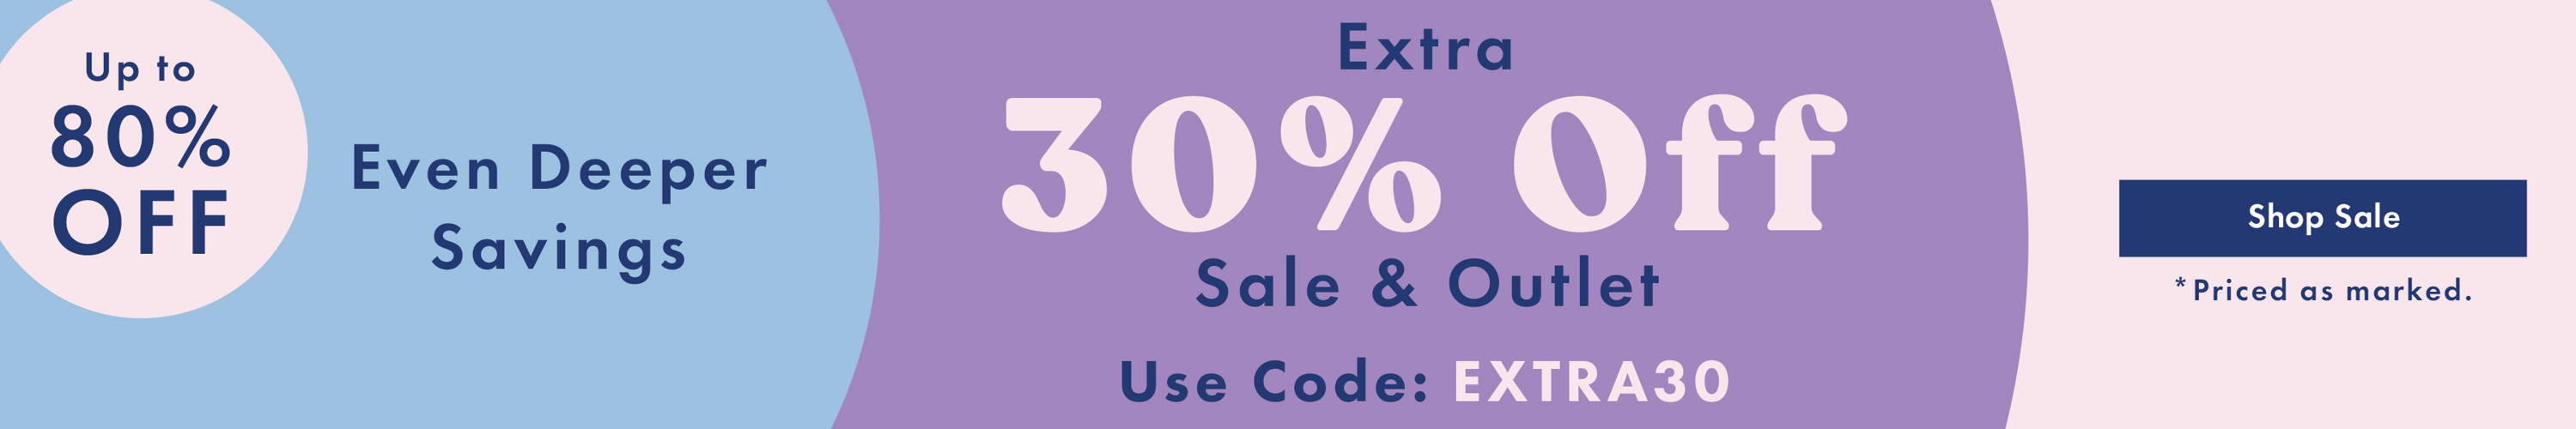 Up to 80% Off Sale & Outlet *Priced as Marked + Extra 30% Off Sale & Outlet - Use Code: EXTRA30